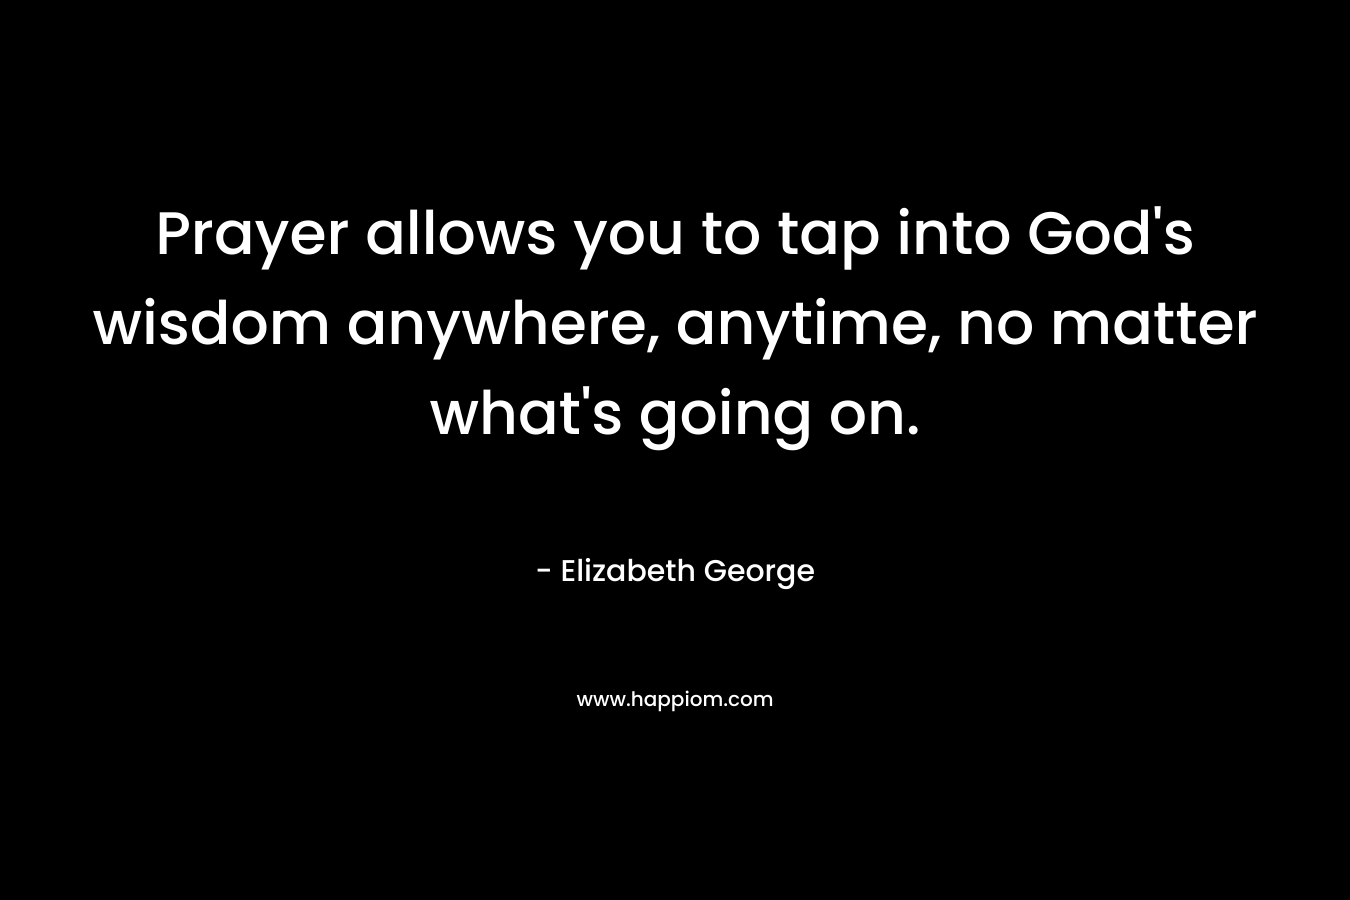 Prayer allows you to tap into God’s wisdom anywhere, anytime, no matter what’s going on. – Elizabeth George